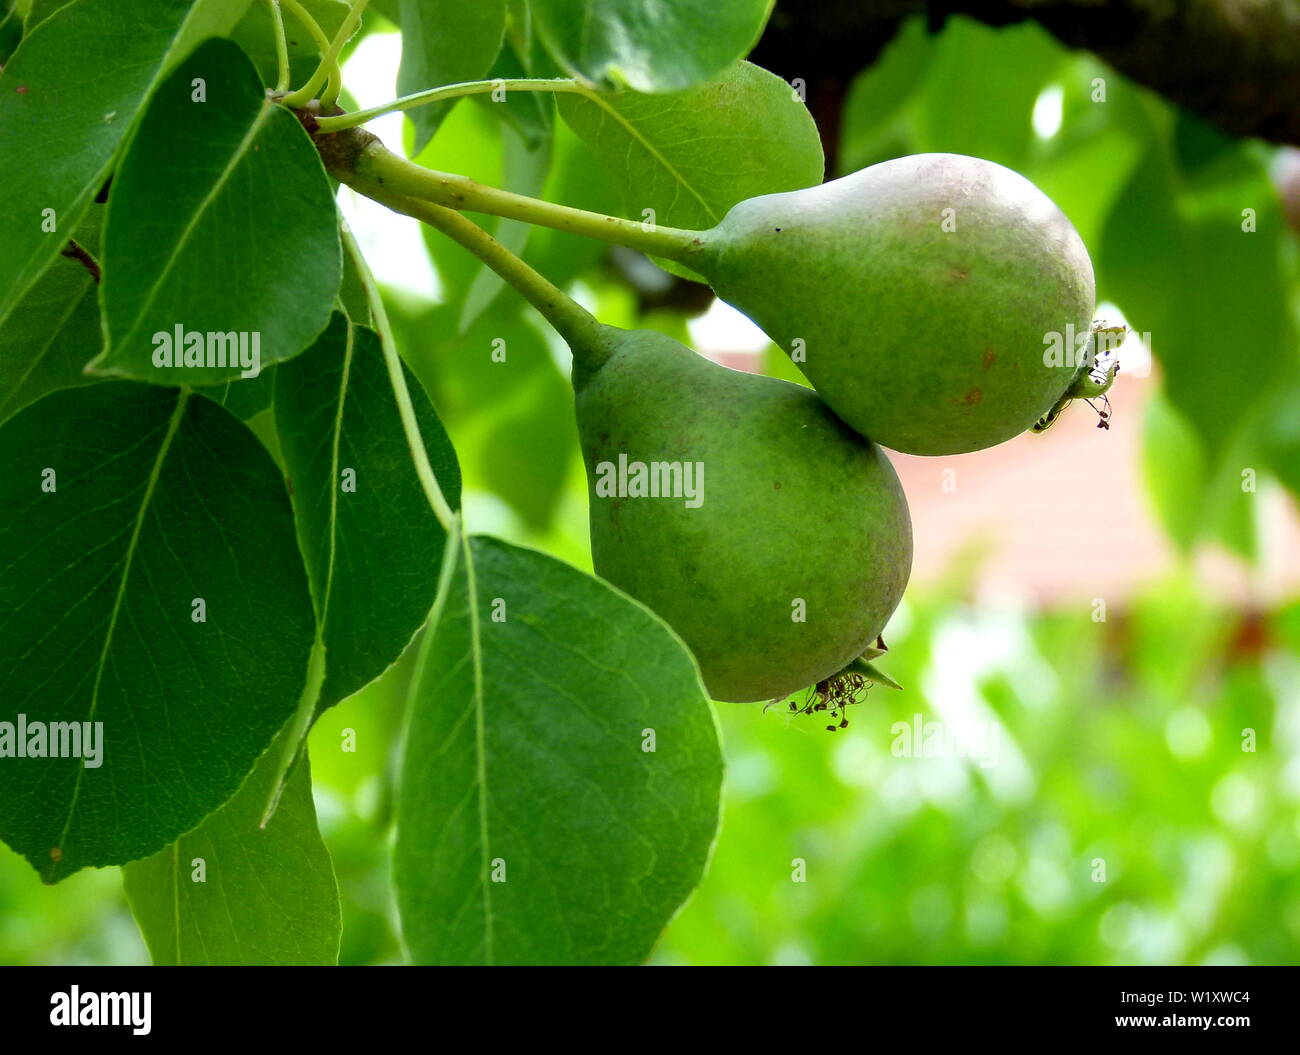 green still immature pears hang on the branch Stock Photo